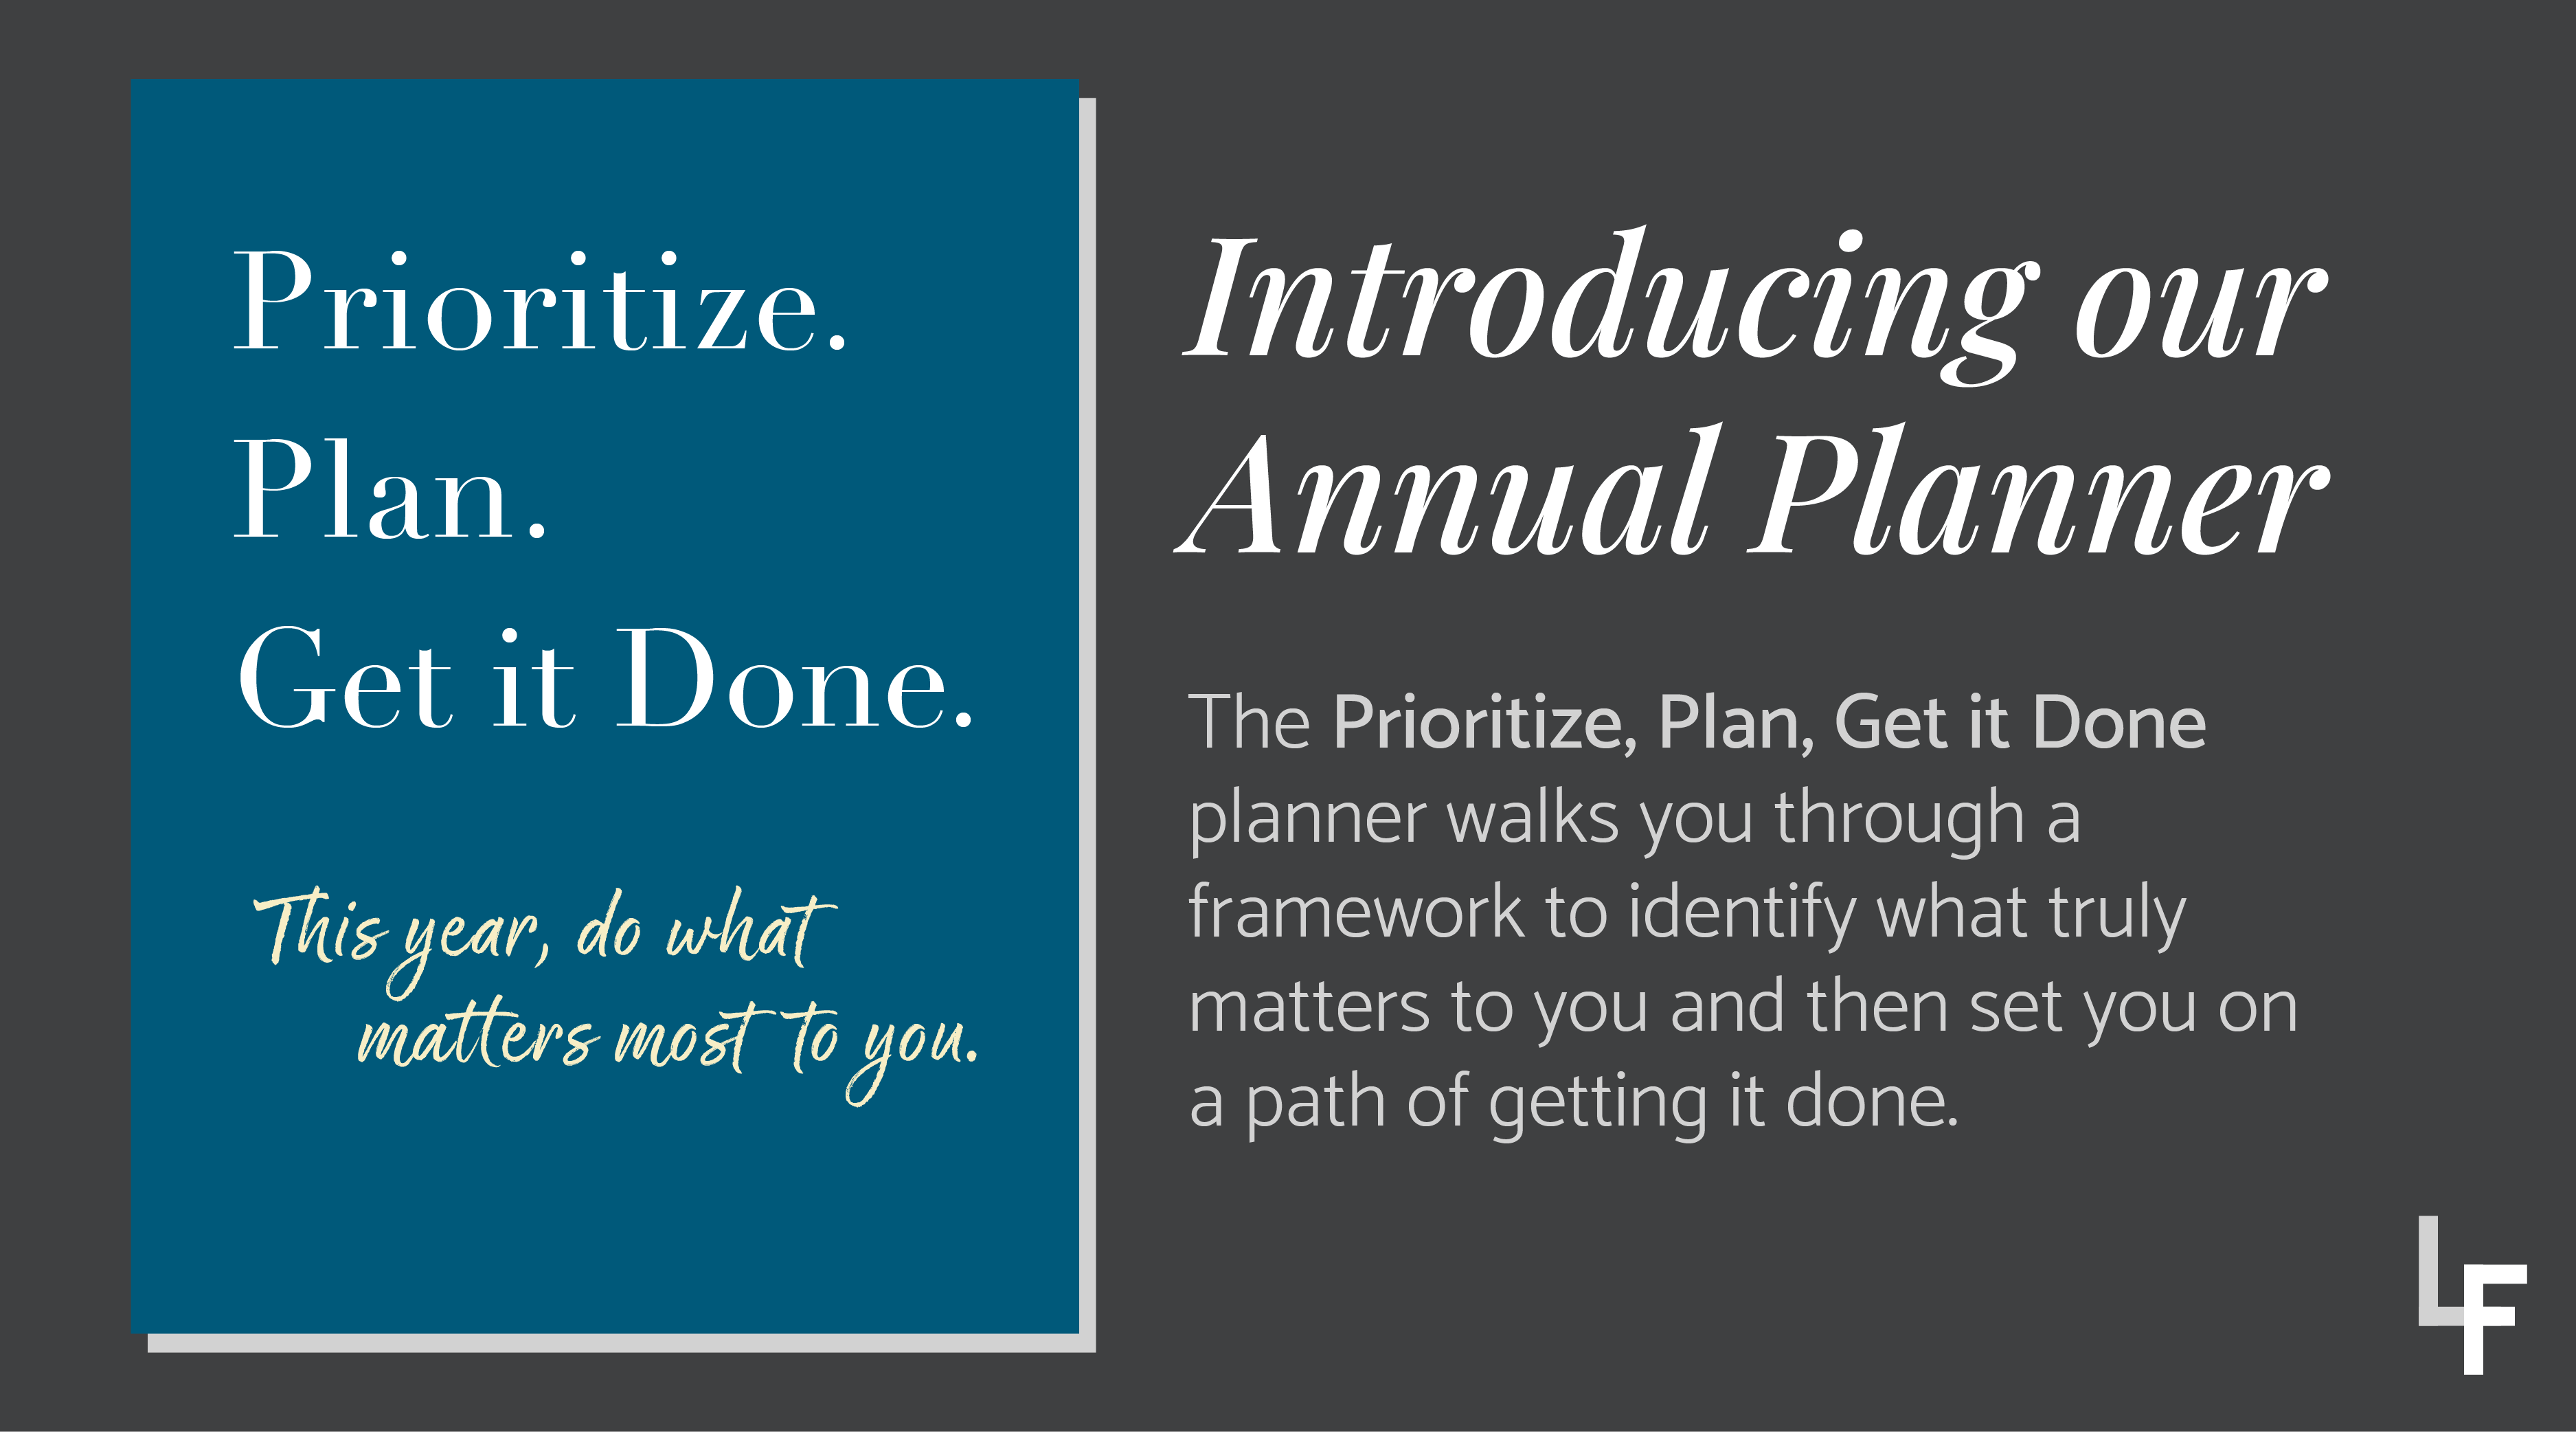 Prioritize, Plan, and Get it Done